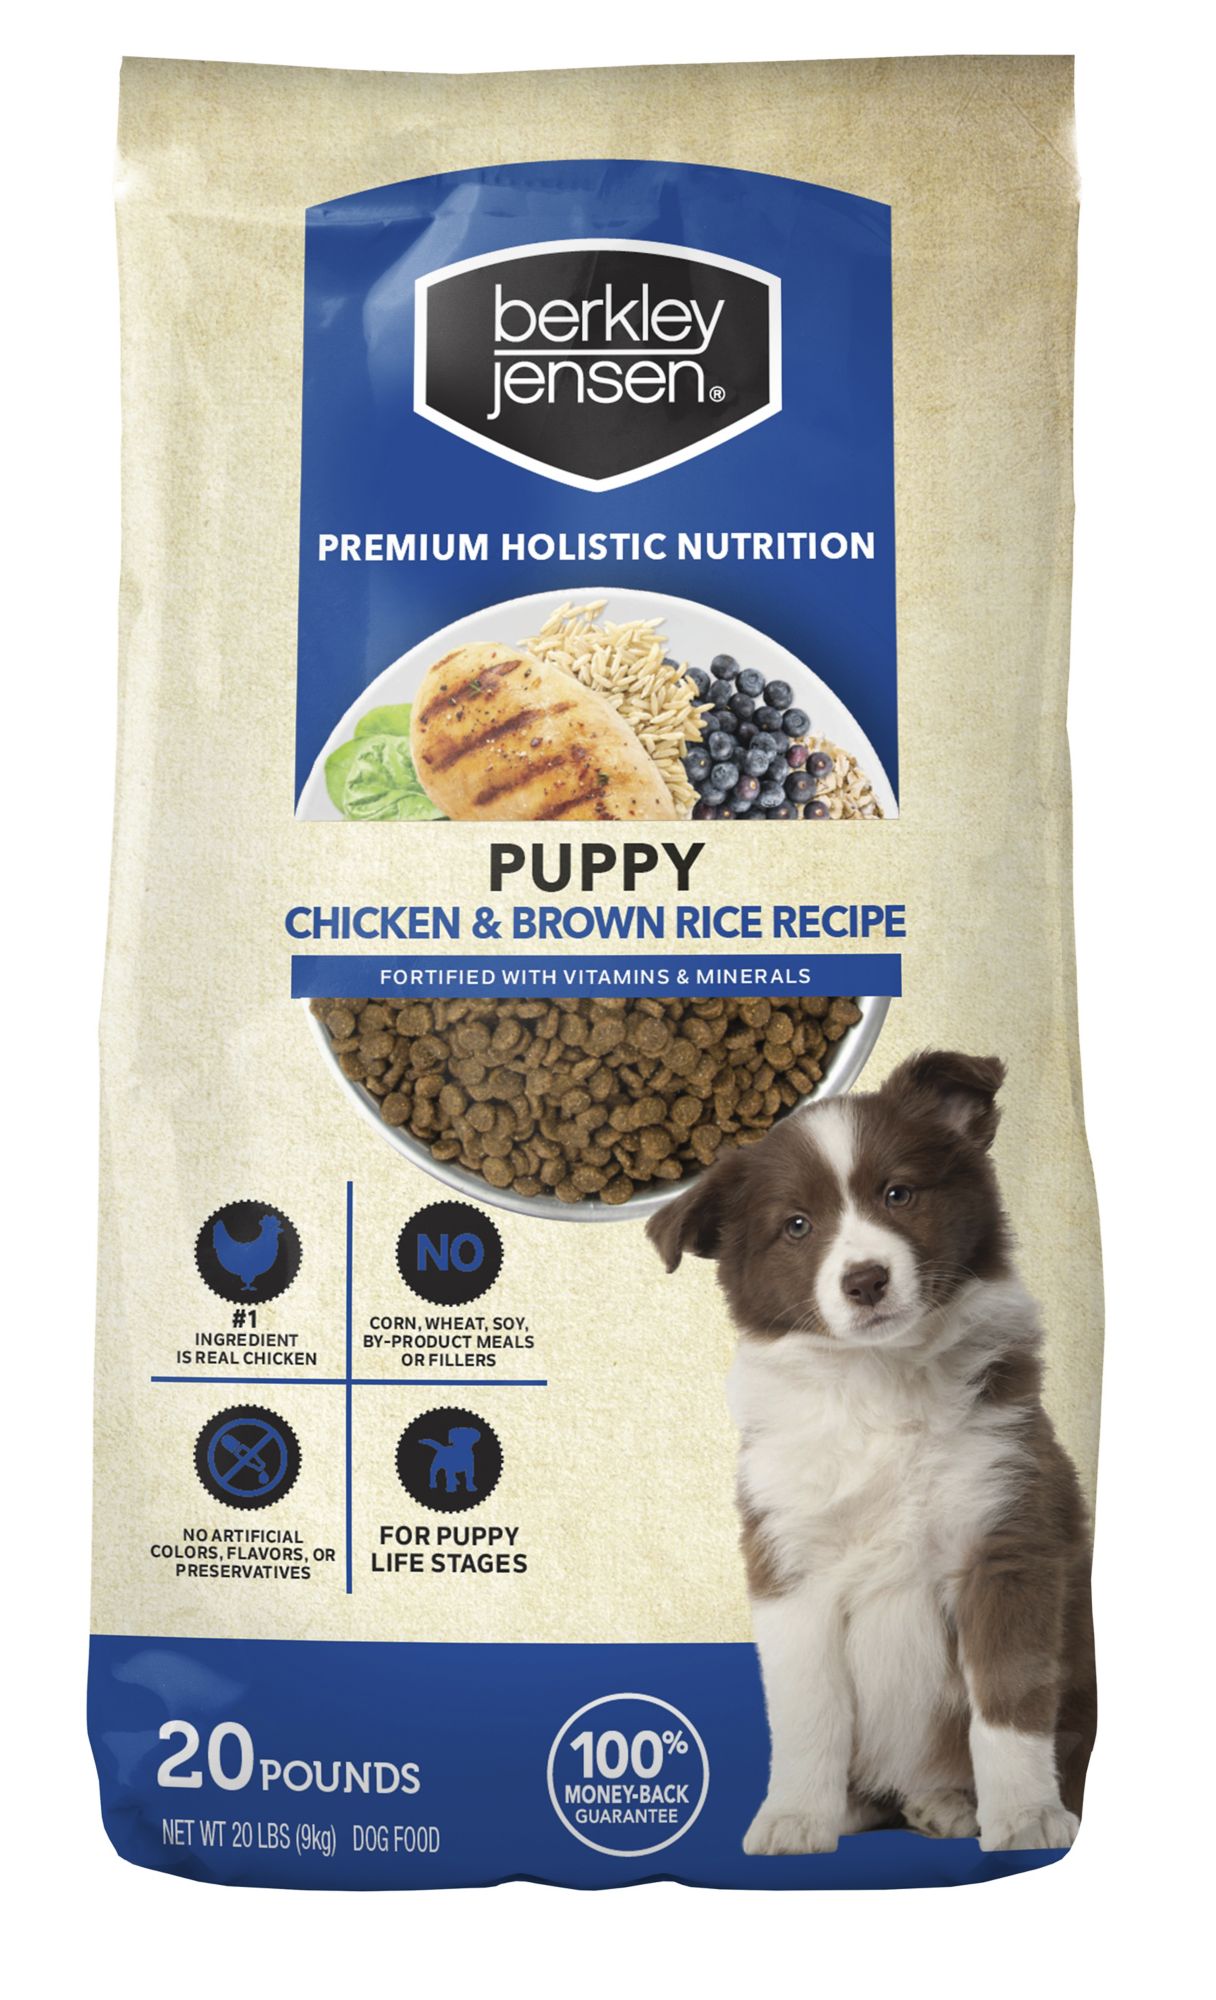 Berkley Jensen Chicken and Brown Rice Dry Dog Food For Puppies, 20 lbs.